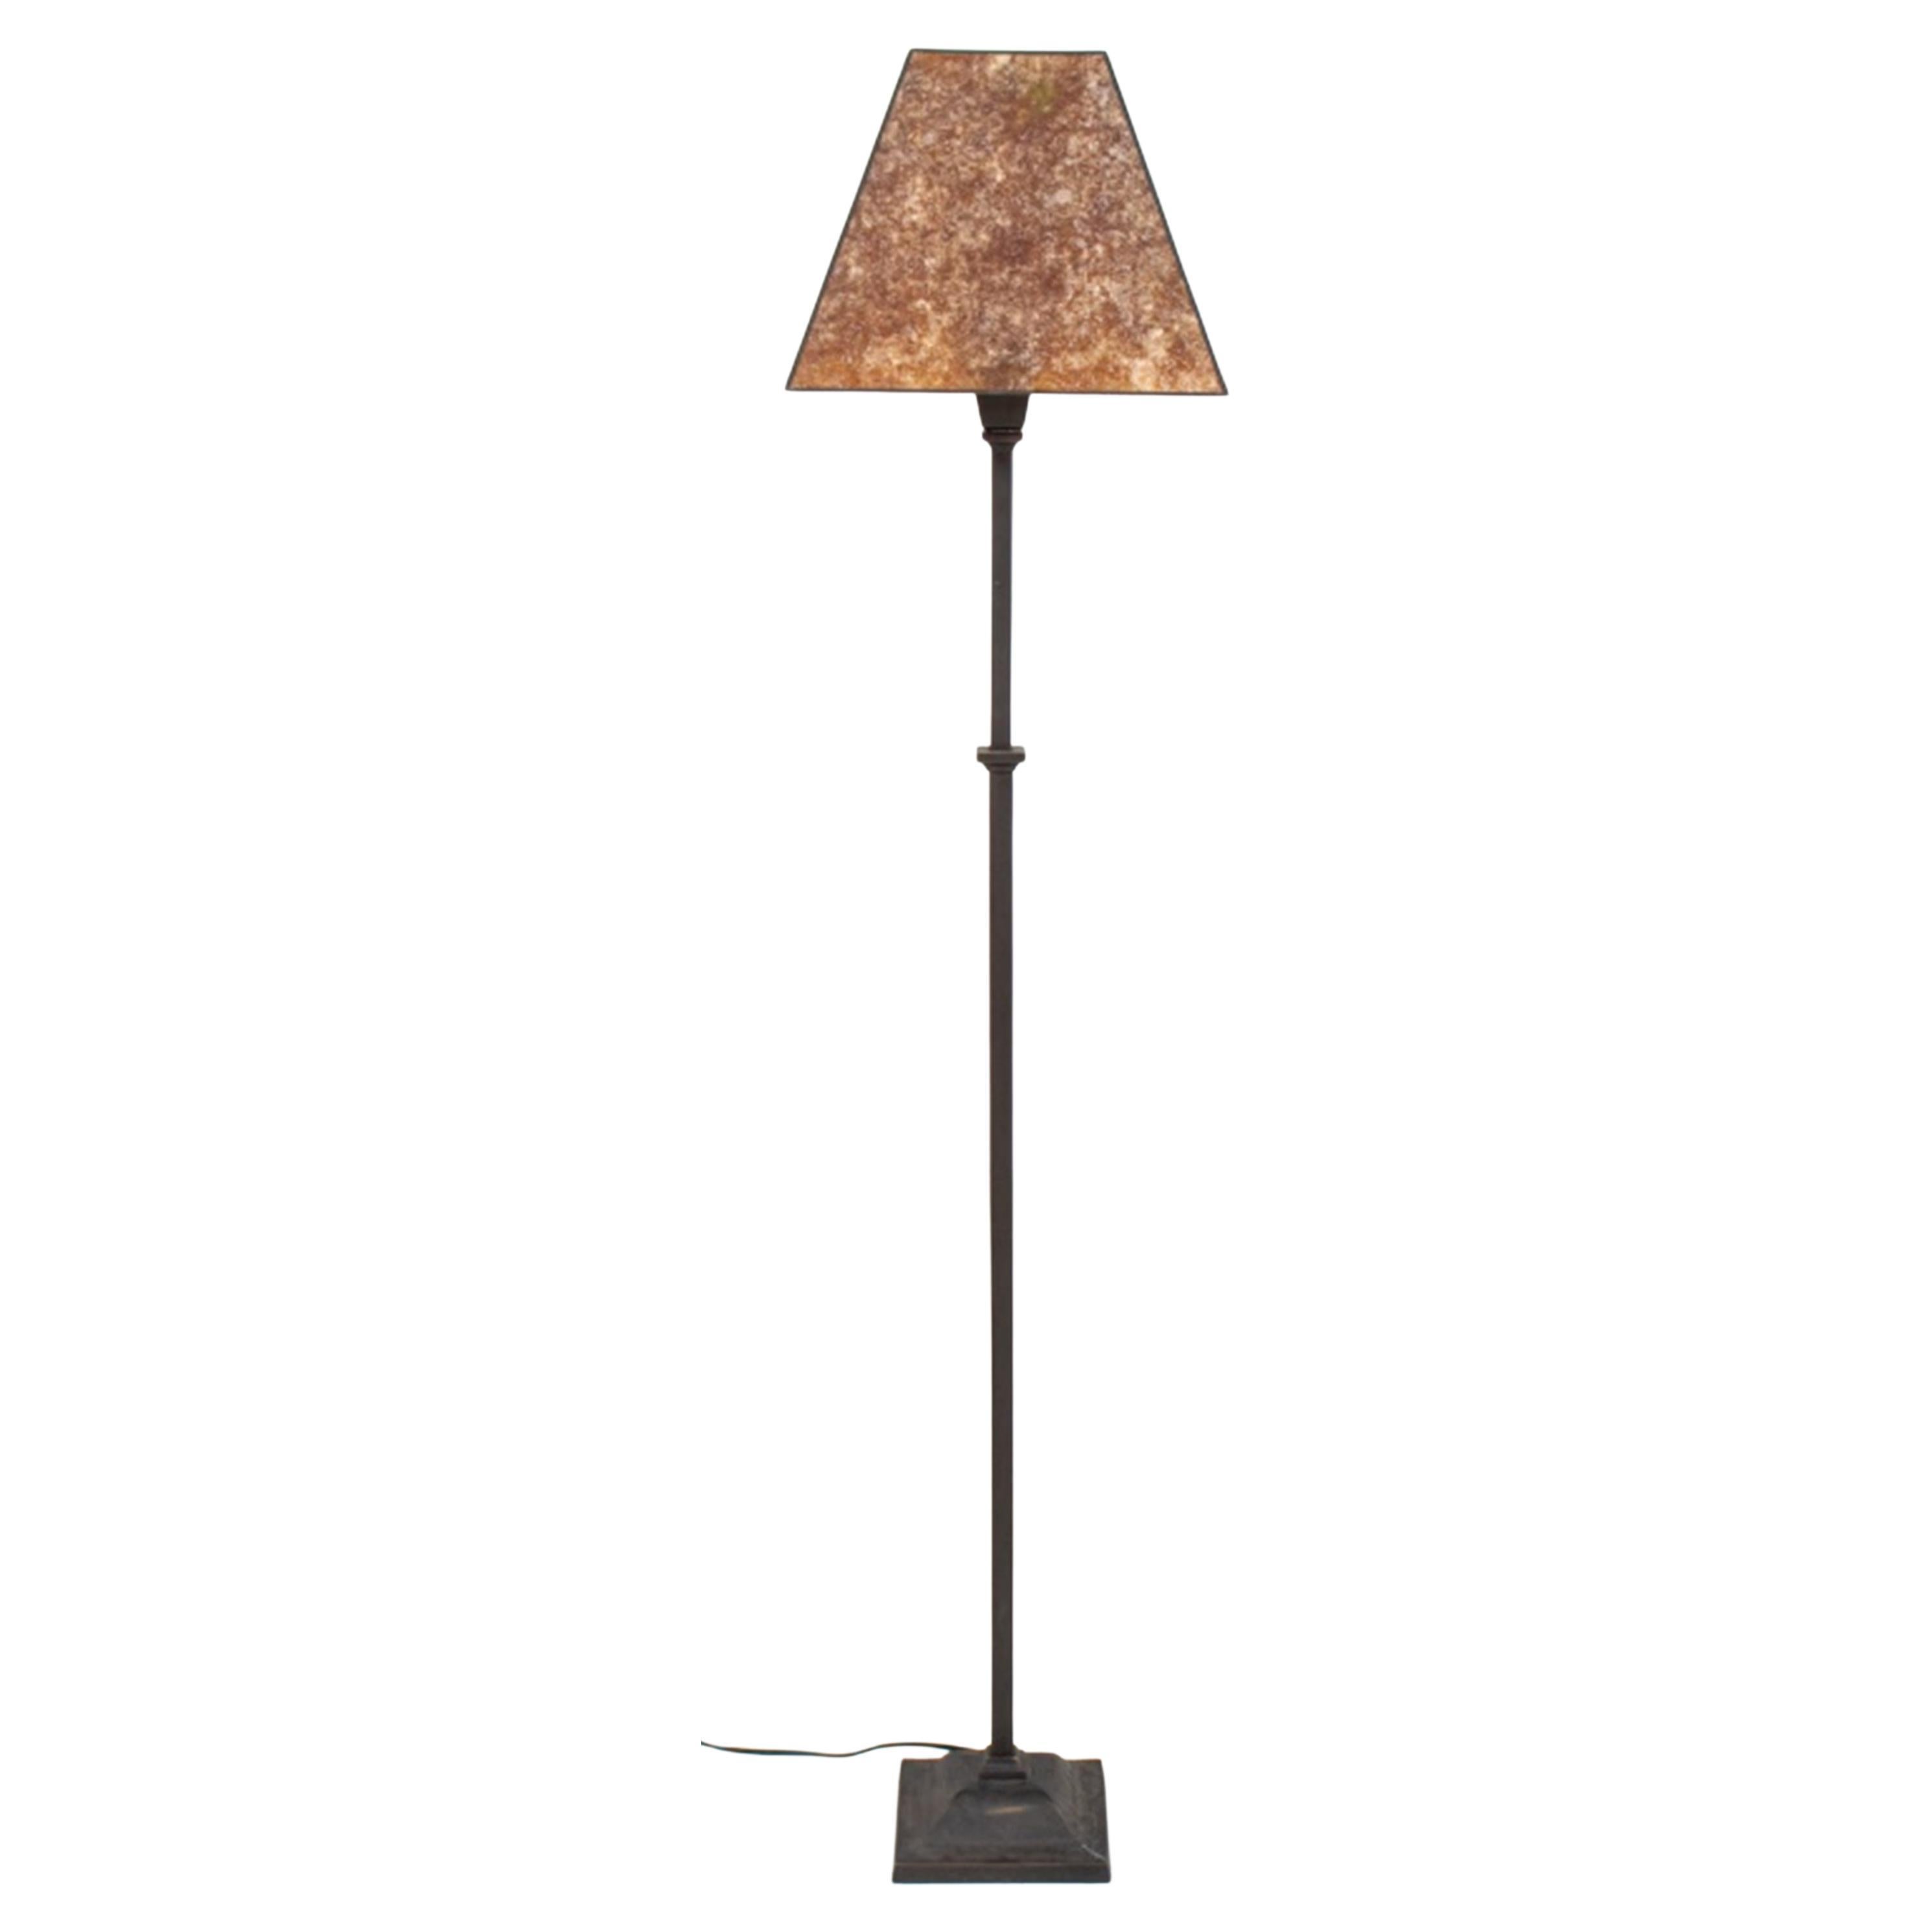 Standing Wrought Iron Floor Lamp with Mica Shade